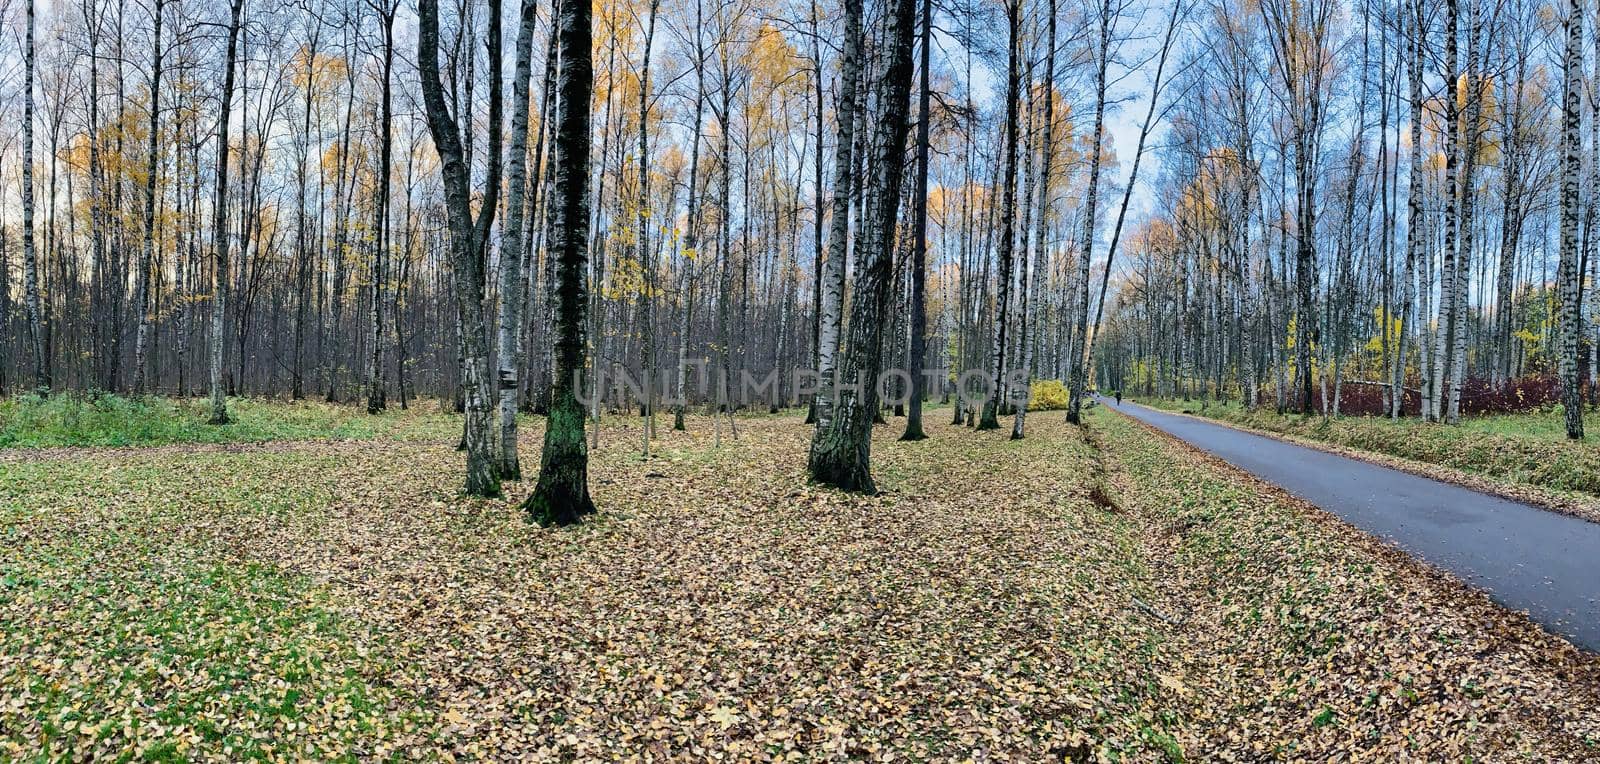 Panorama of first days of autumn in a park, long shadows, blue sky, Buds of trees, Trunks of birches, sunny day, path in the woods, yellow leafs, perspective